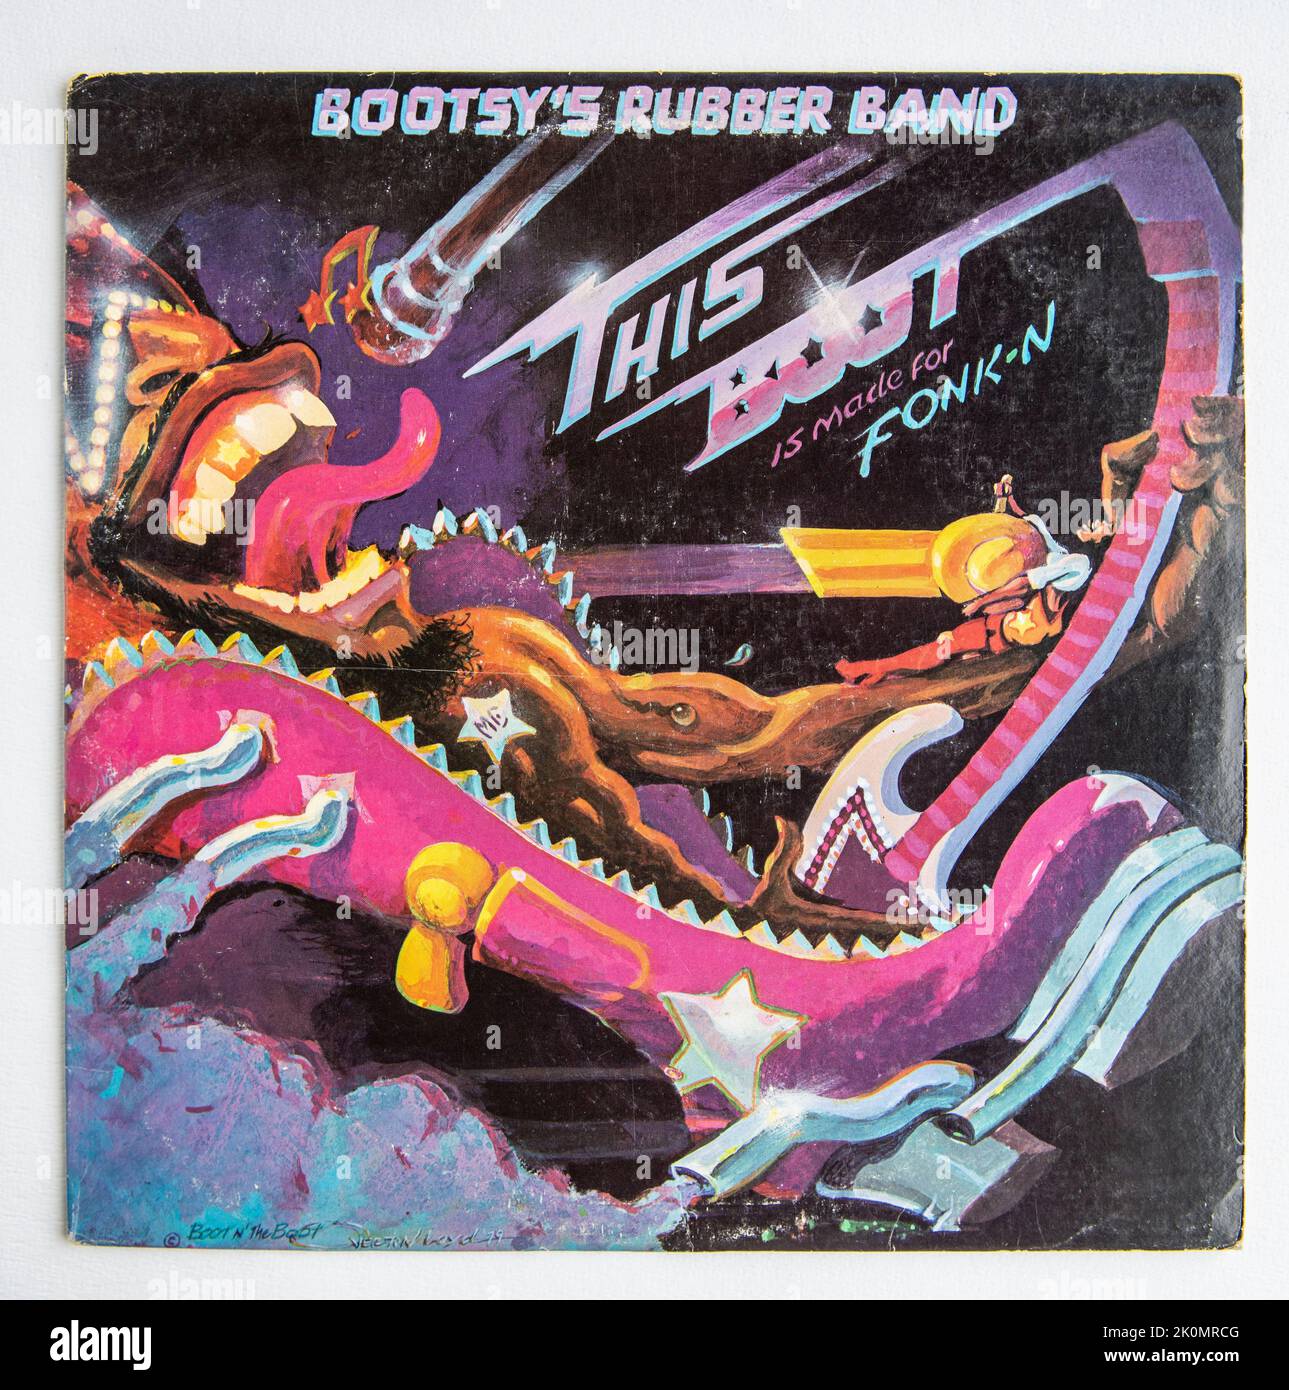 LP cover of This Boot is Made For Fonk-N, the fourth studio album by Bootsy's Rubber Band, which was released in 1979 Stock Photo